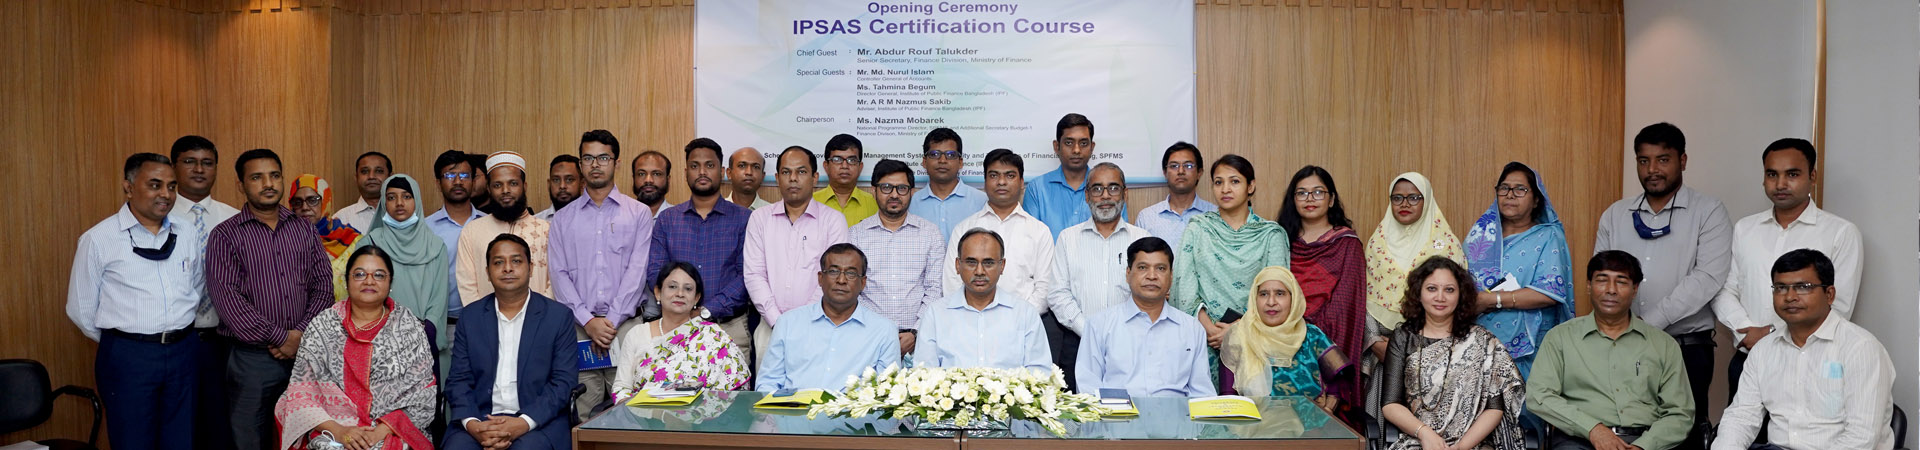 Opening Ceremony of IPSAS Certification Course